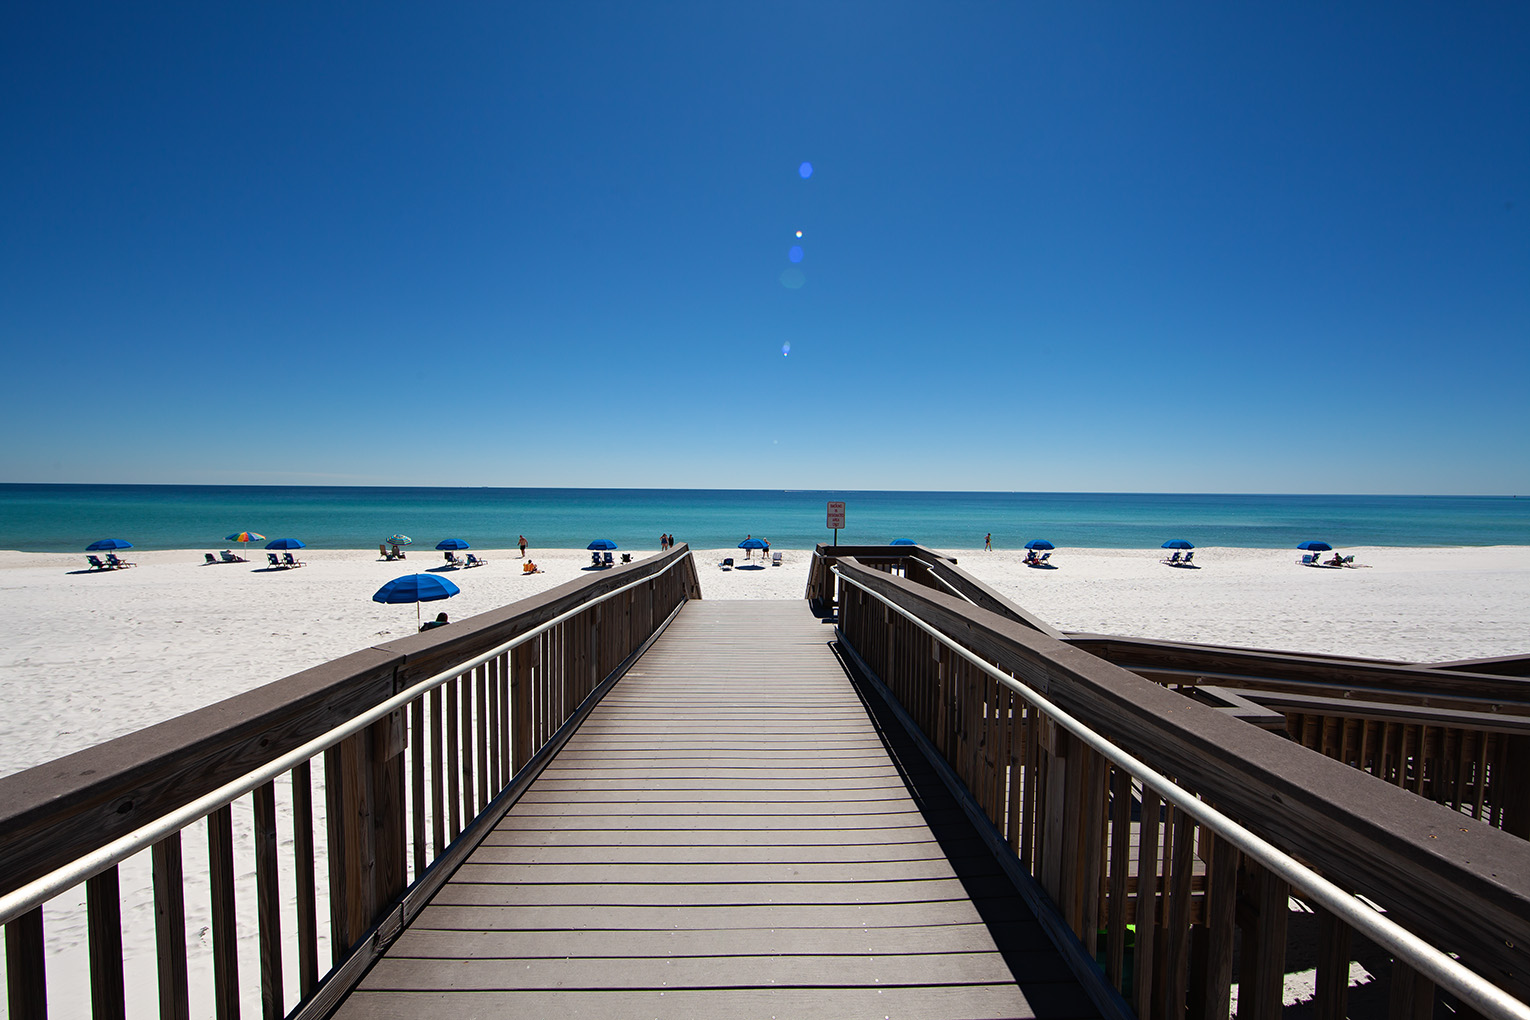 Holiday Surf & Racquet Club 514 Condo rental in Holiday Surf & Racquet Club in Destin Florida - #1